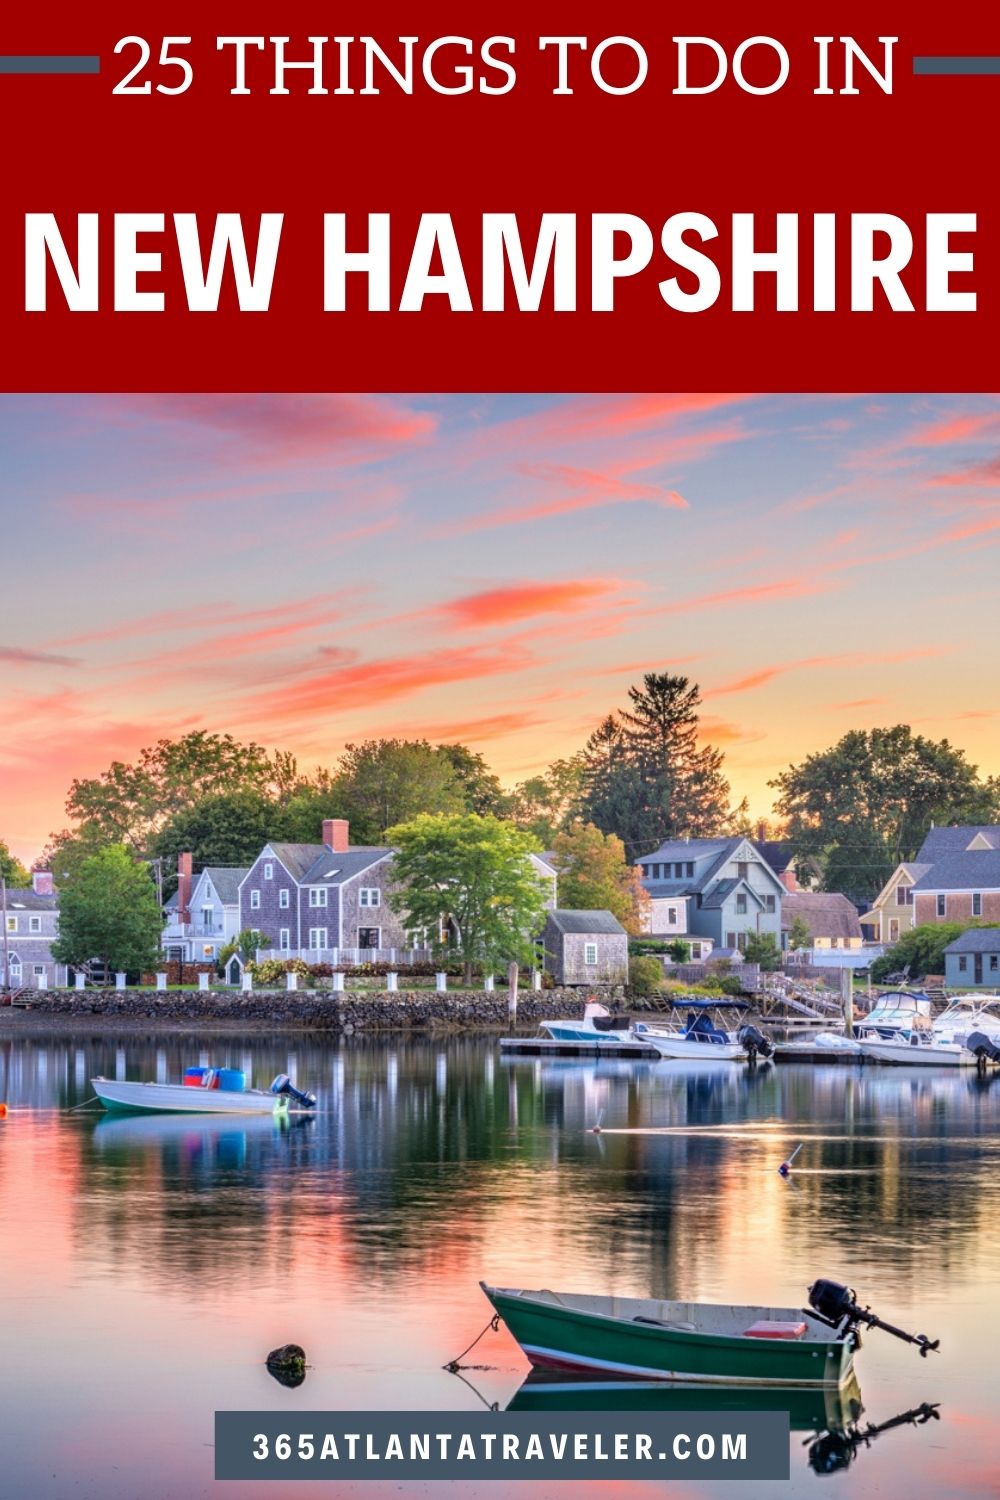 25 BEST THINGS TO DO IN NEW HAMPSHIRE YOU'LL LOVE